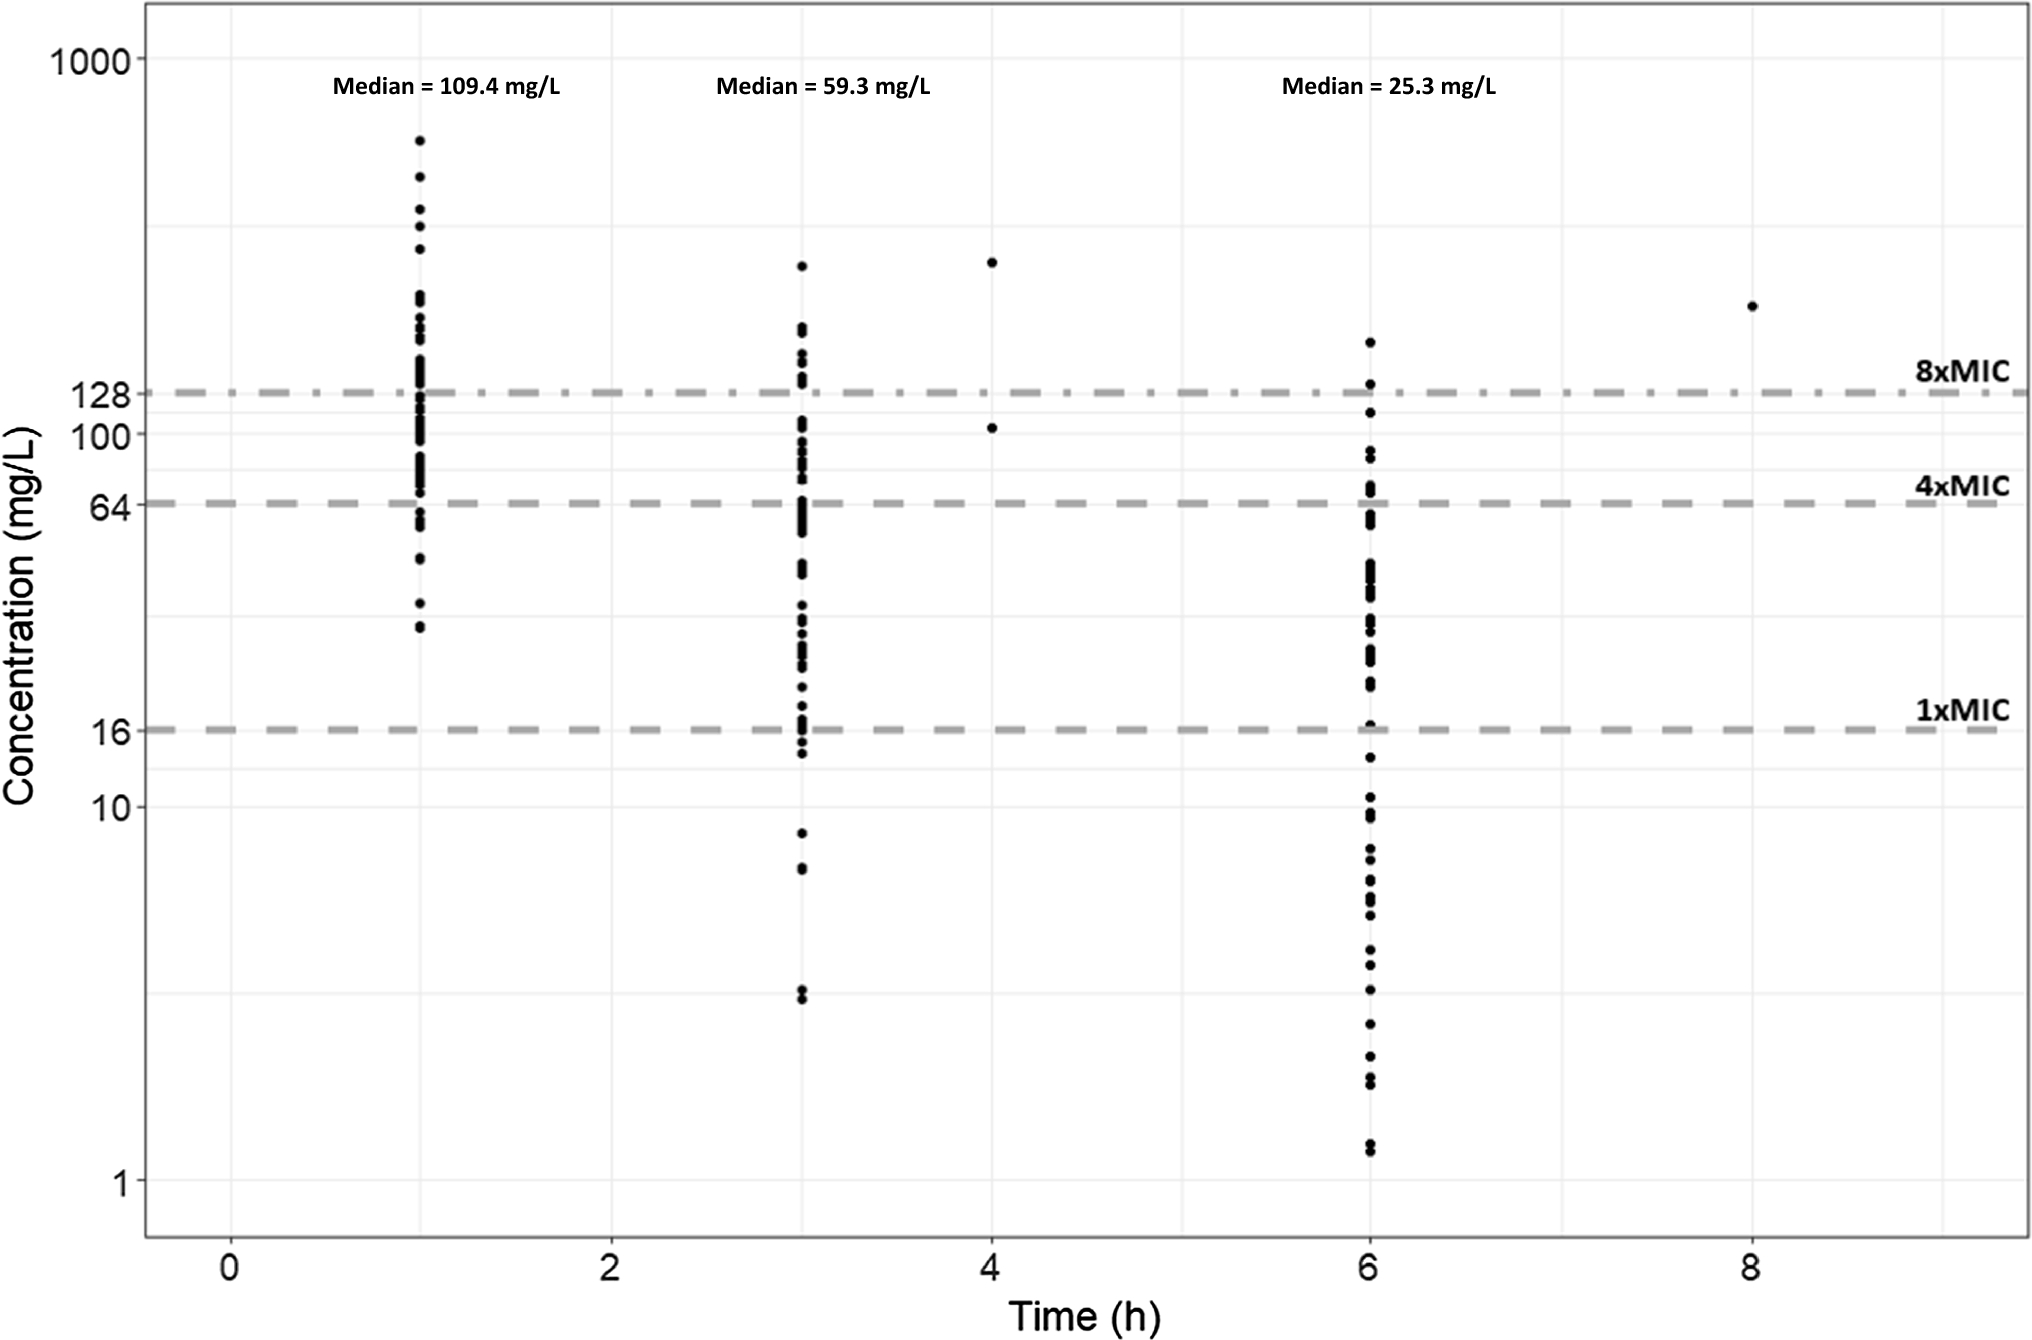 Exposure levels and target attainment of piperacillin/tazobactam in adult patients admitted to the intensive care unit: a prospective observational study